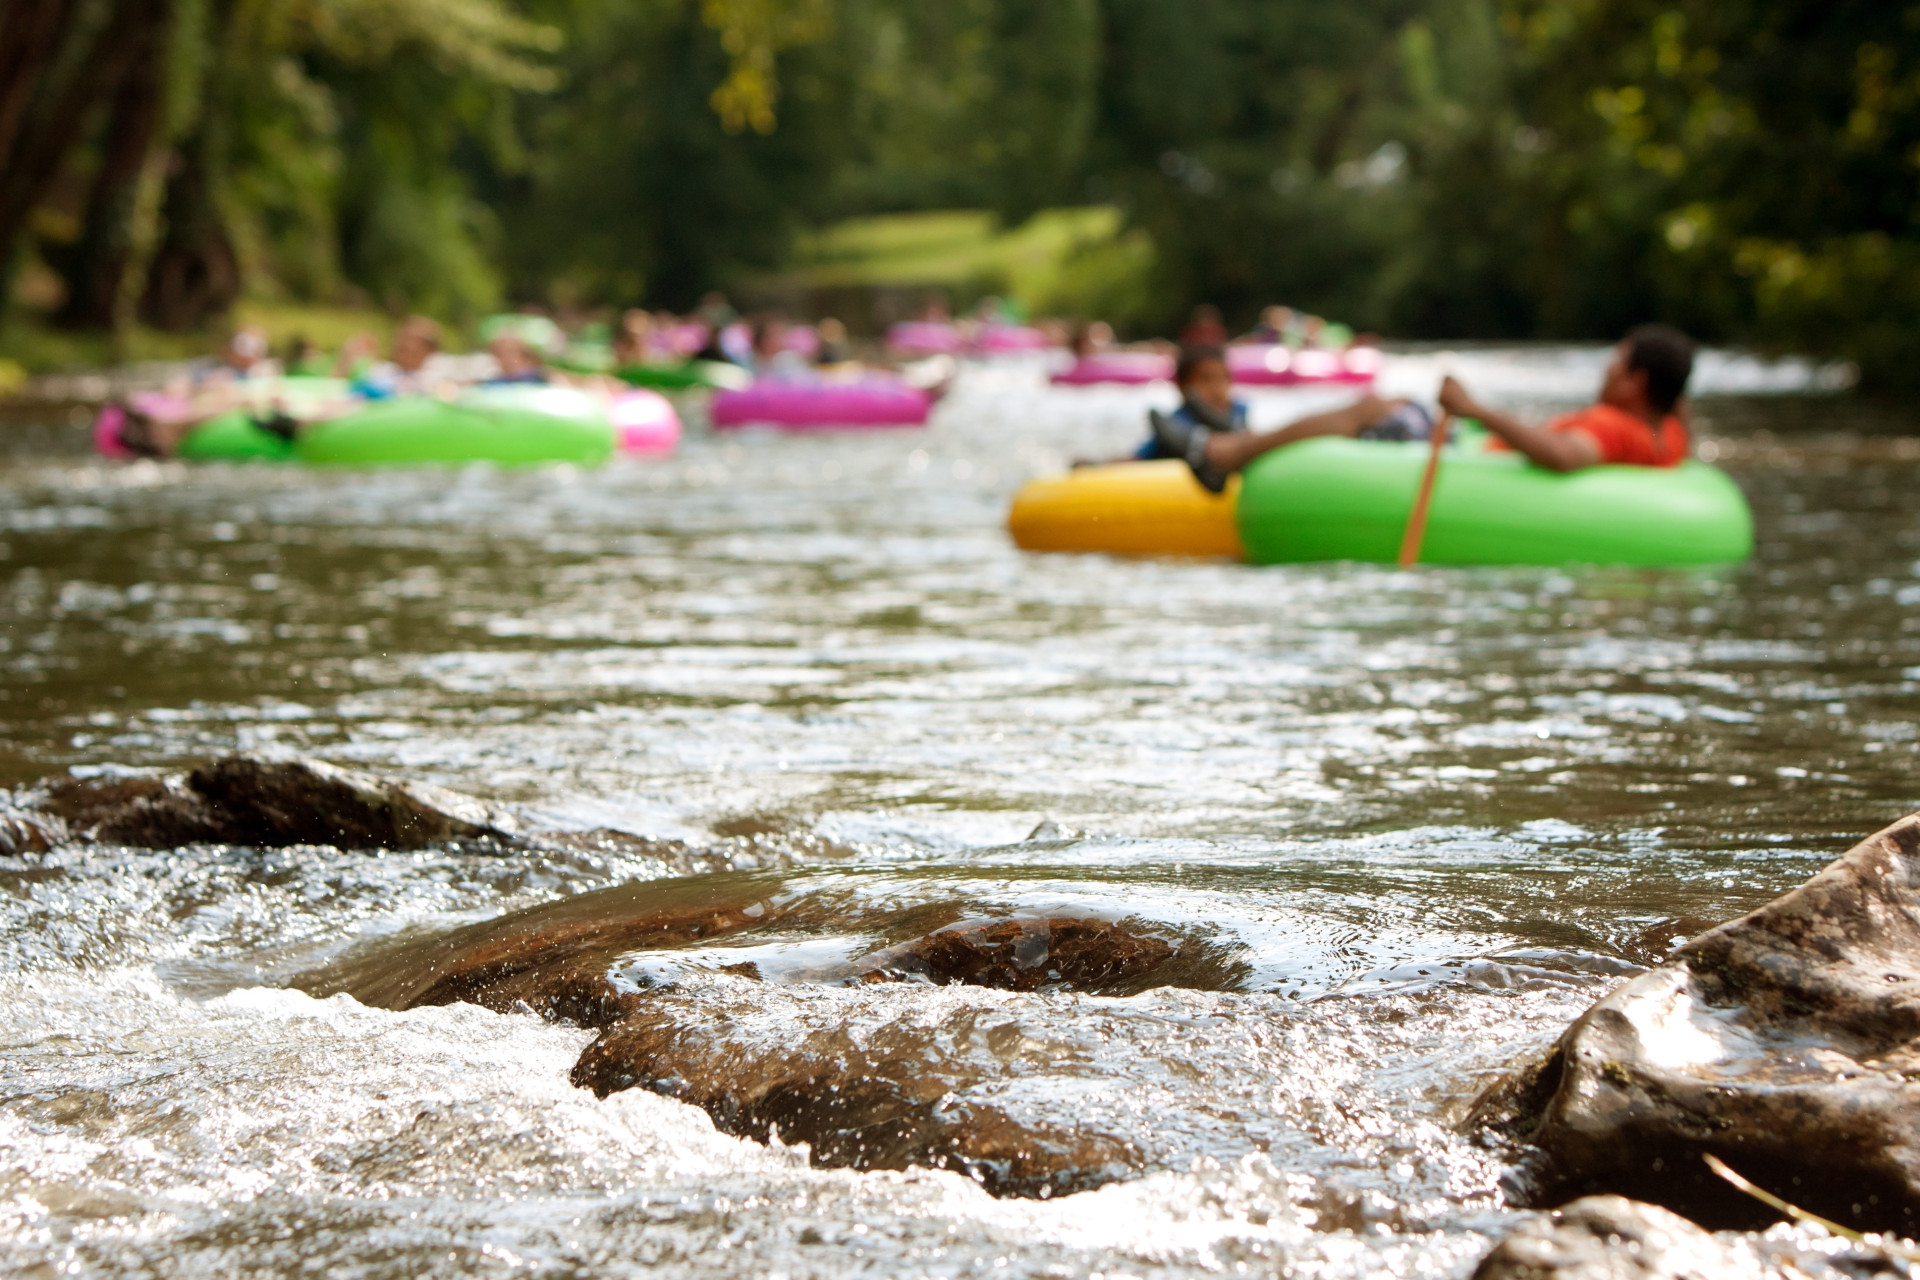 Grab an inner tube and head out of the city to one of Portland's famous lazy rivers.<p><a href="https://www.msn.com/en-us/community/channel/vid-7xx8mnucu55yw63we9va2gwr7uihbxwc68fxqp25x6tg4ftibpra?cvid=94631541bc0f4f89bfd59158d696ad7e">Follow us and access great exclusive content every day</a></p>